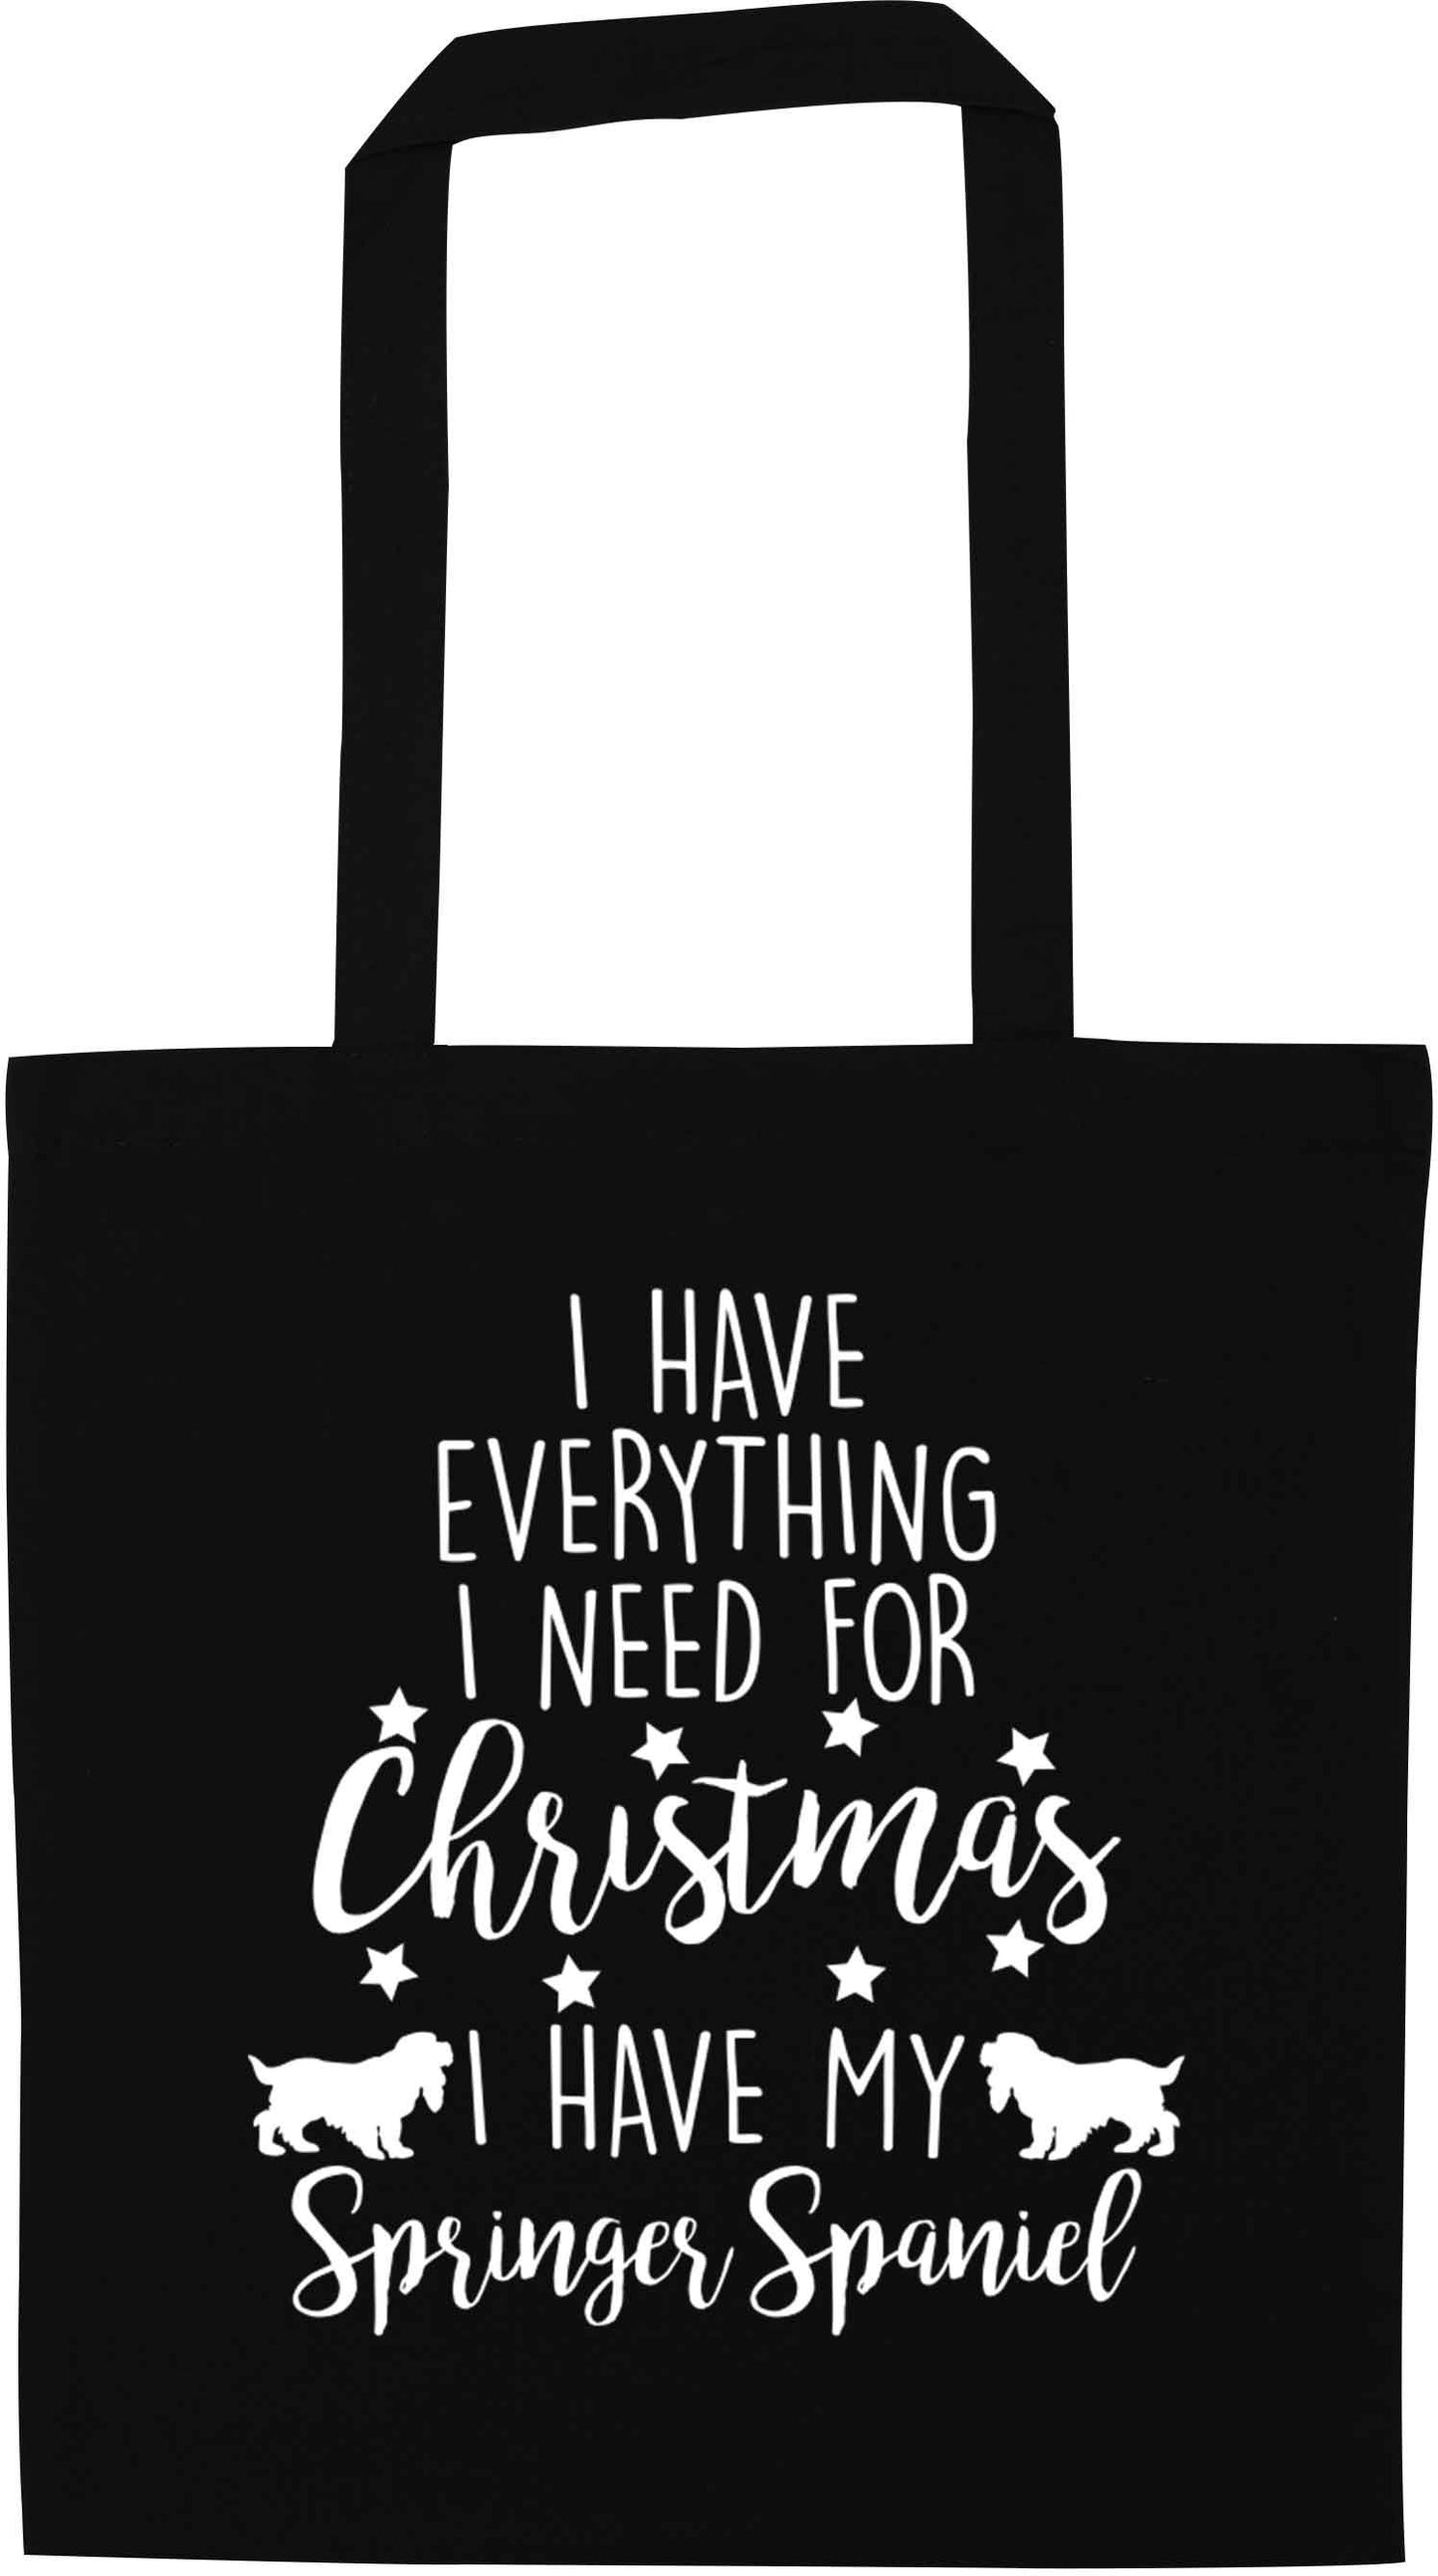 I have everything I need for Christmas I have my springer spaniel black tote bag